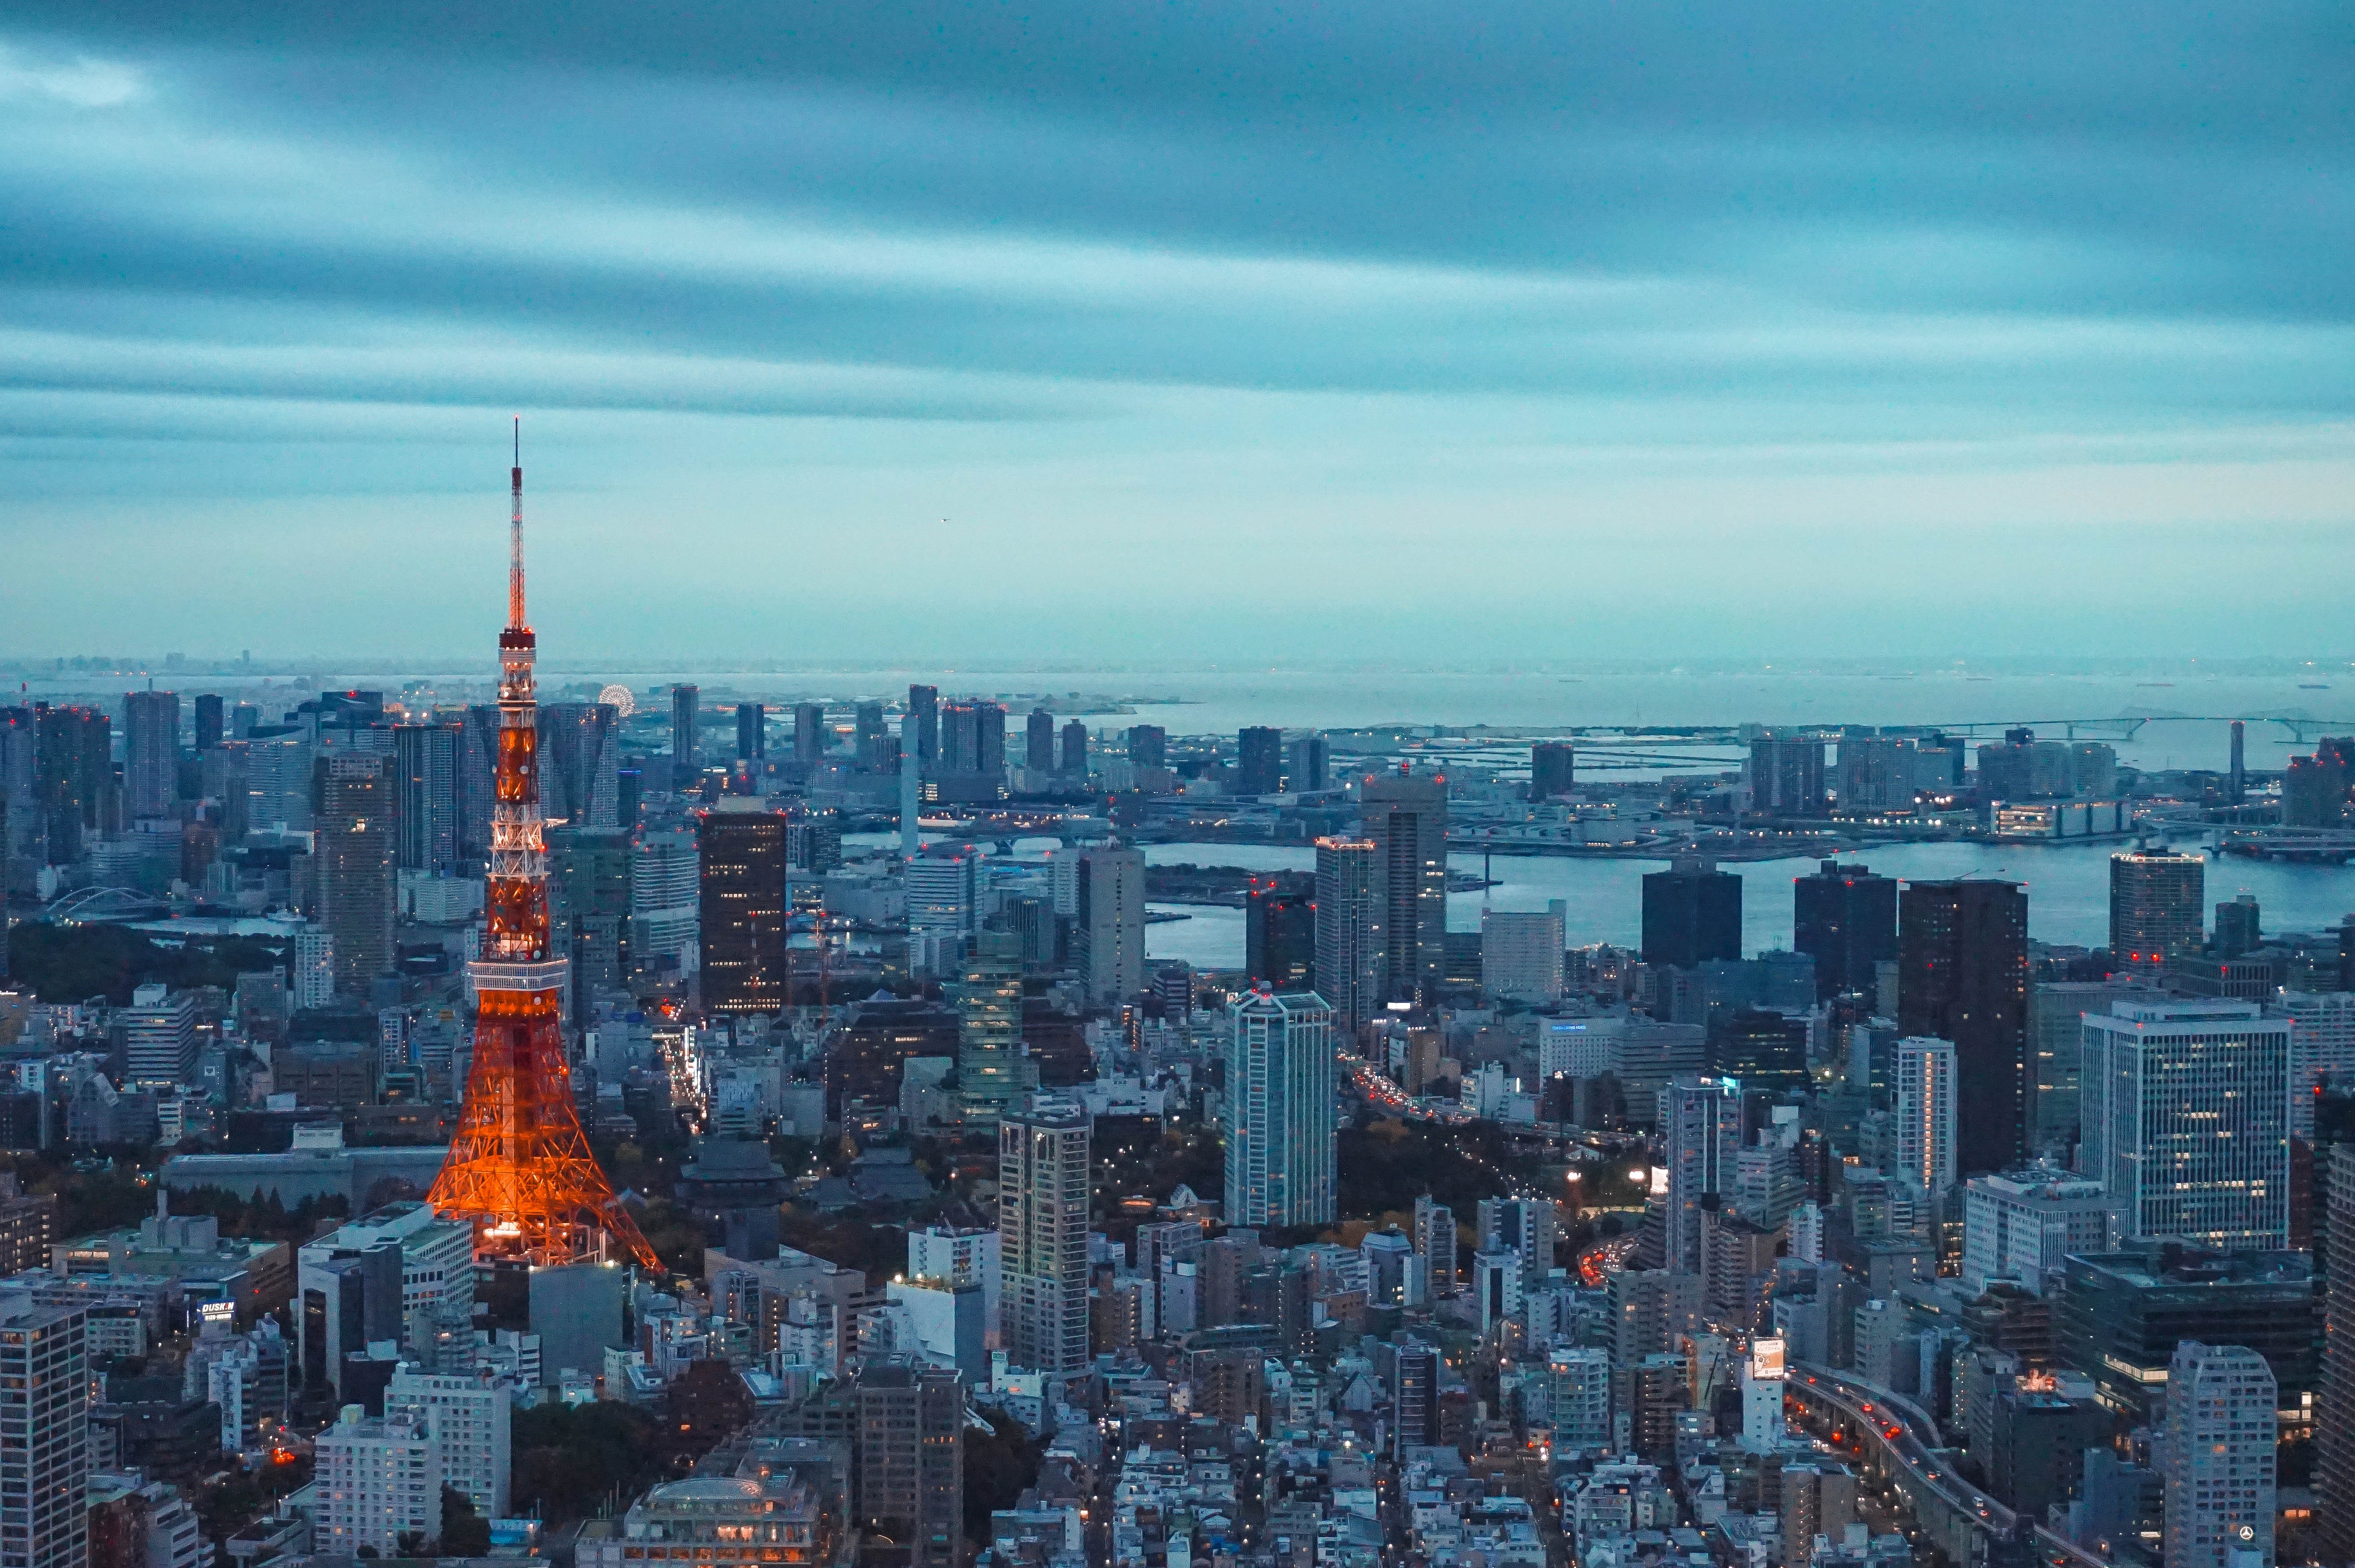 The best place to take a photo of the Tokyo Tower is at the viewing deck of Mori building in Roponggi Hills

